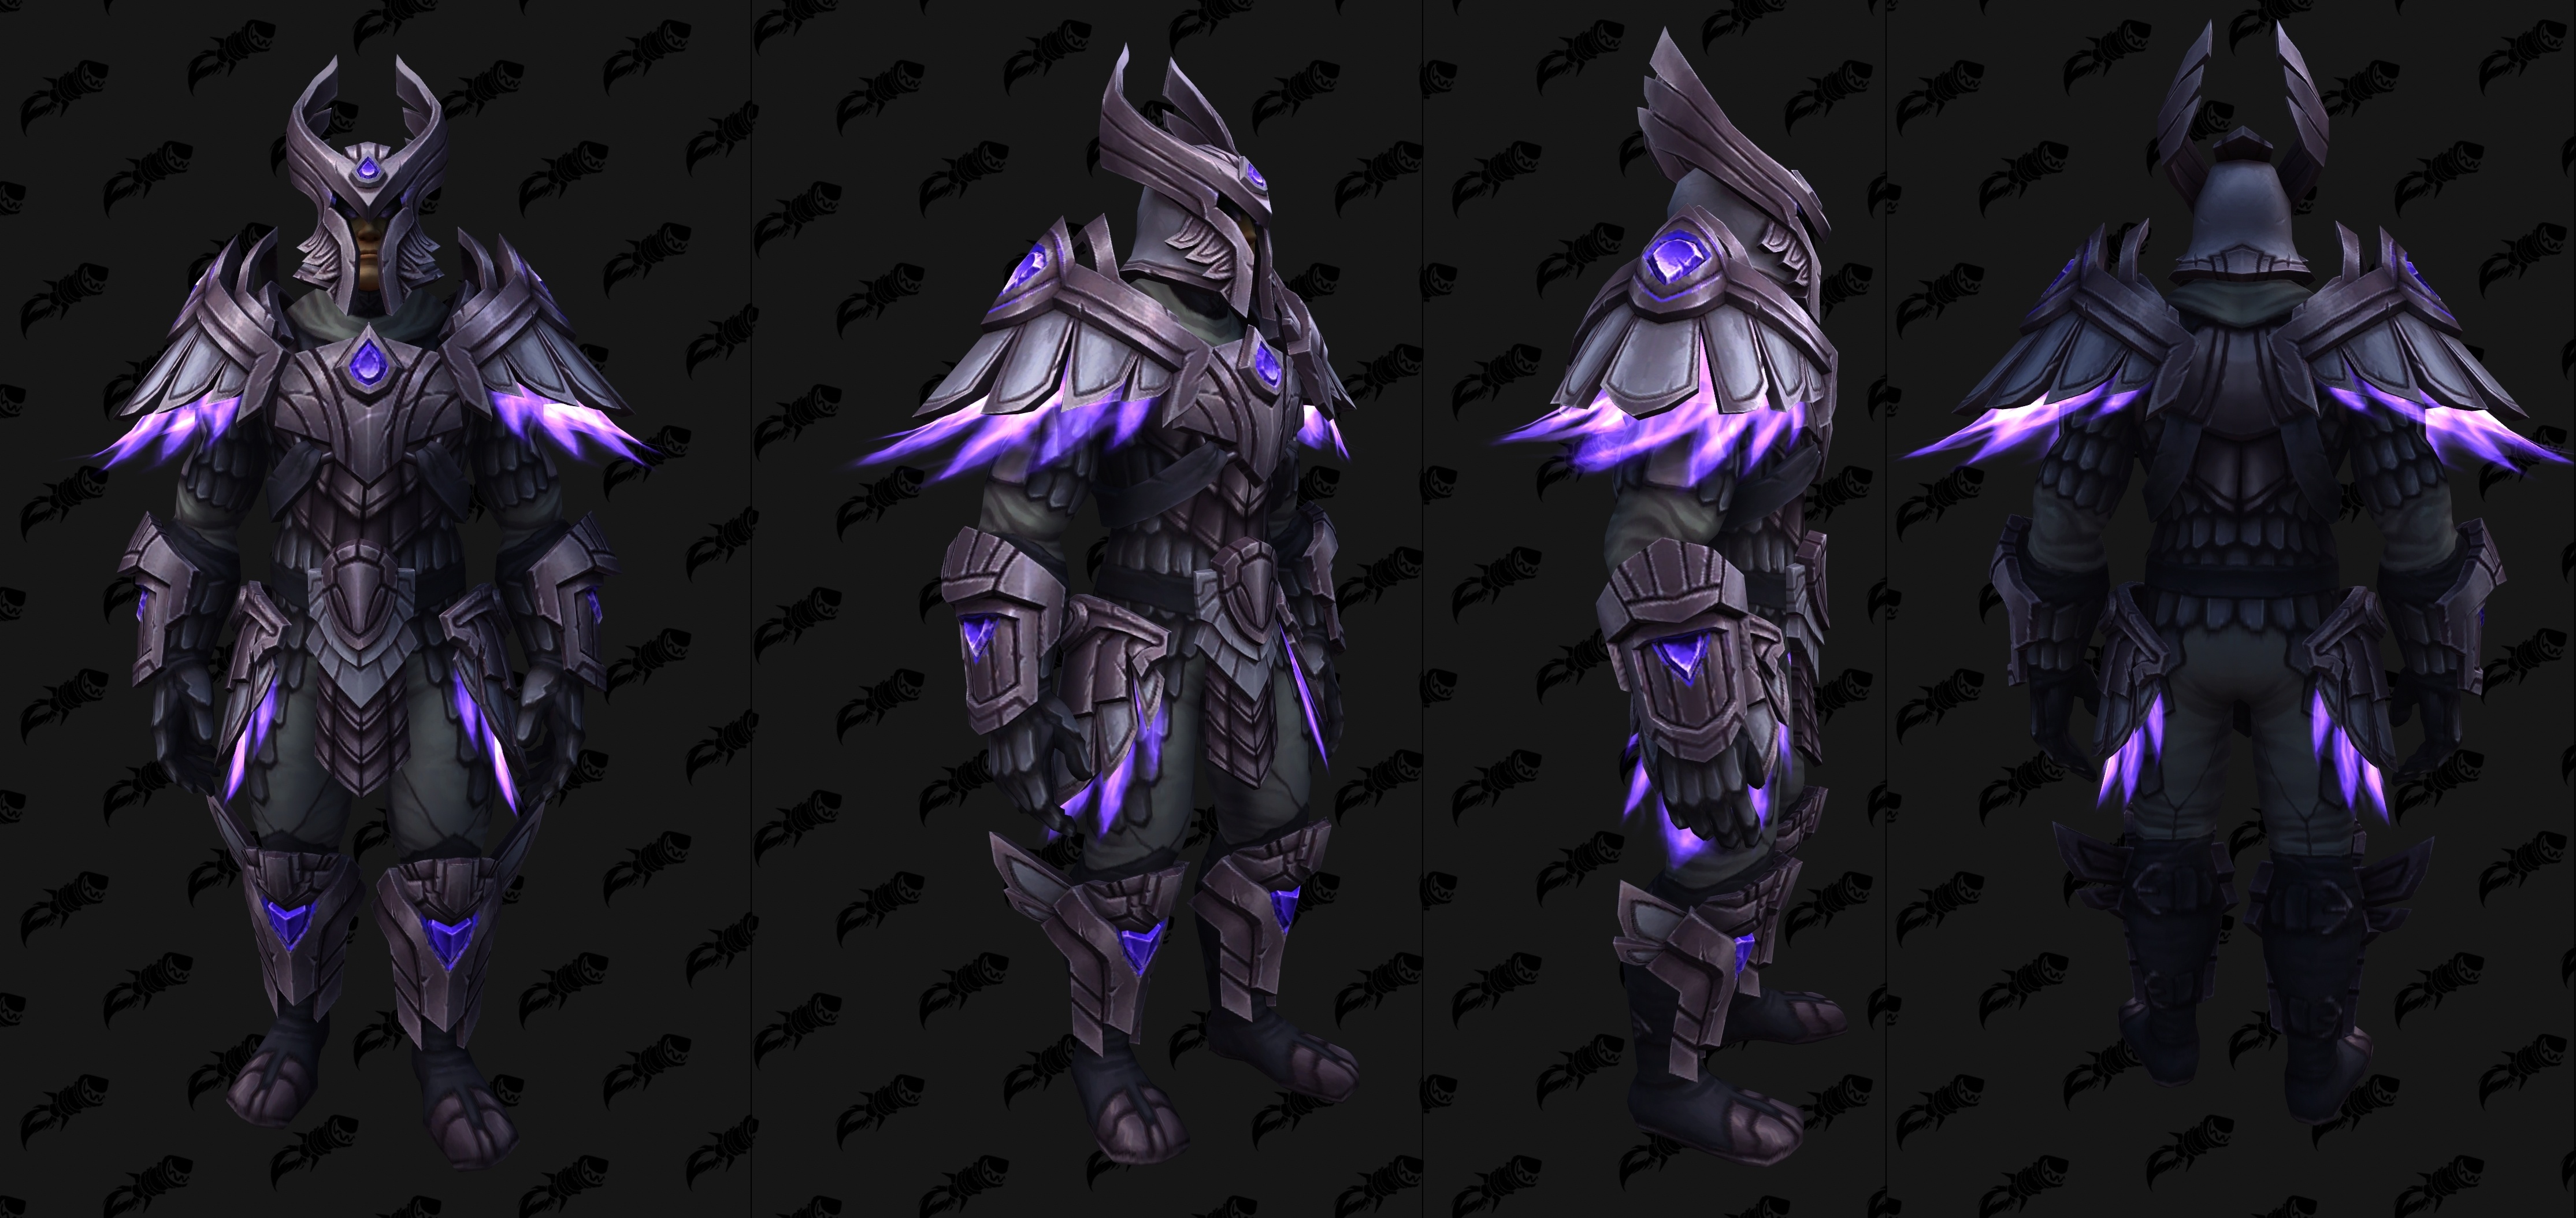 Concept Art of Covenant Armor and Weapons from the Shadowlands Art Book -  Wowhead News